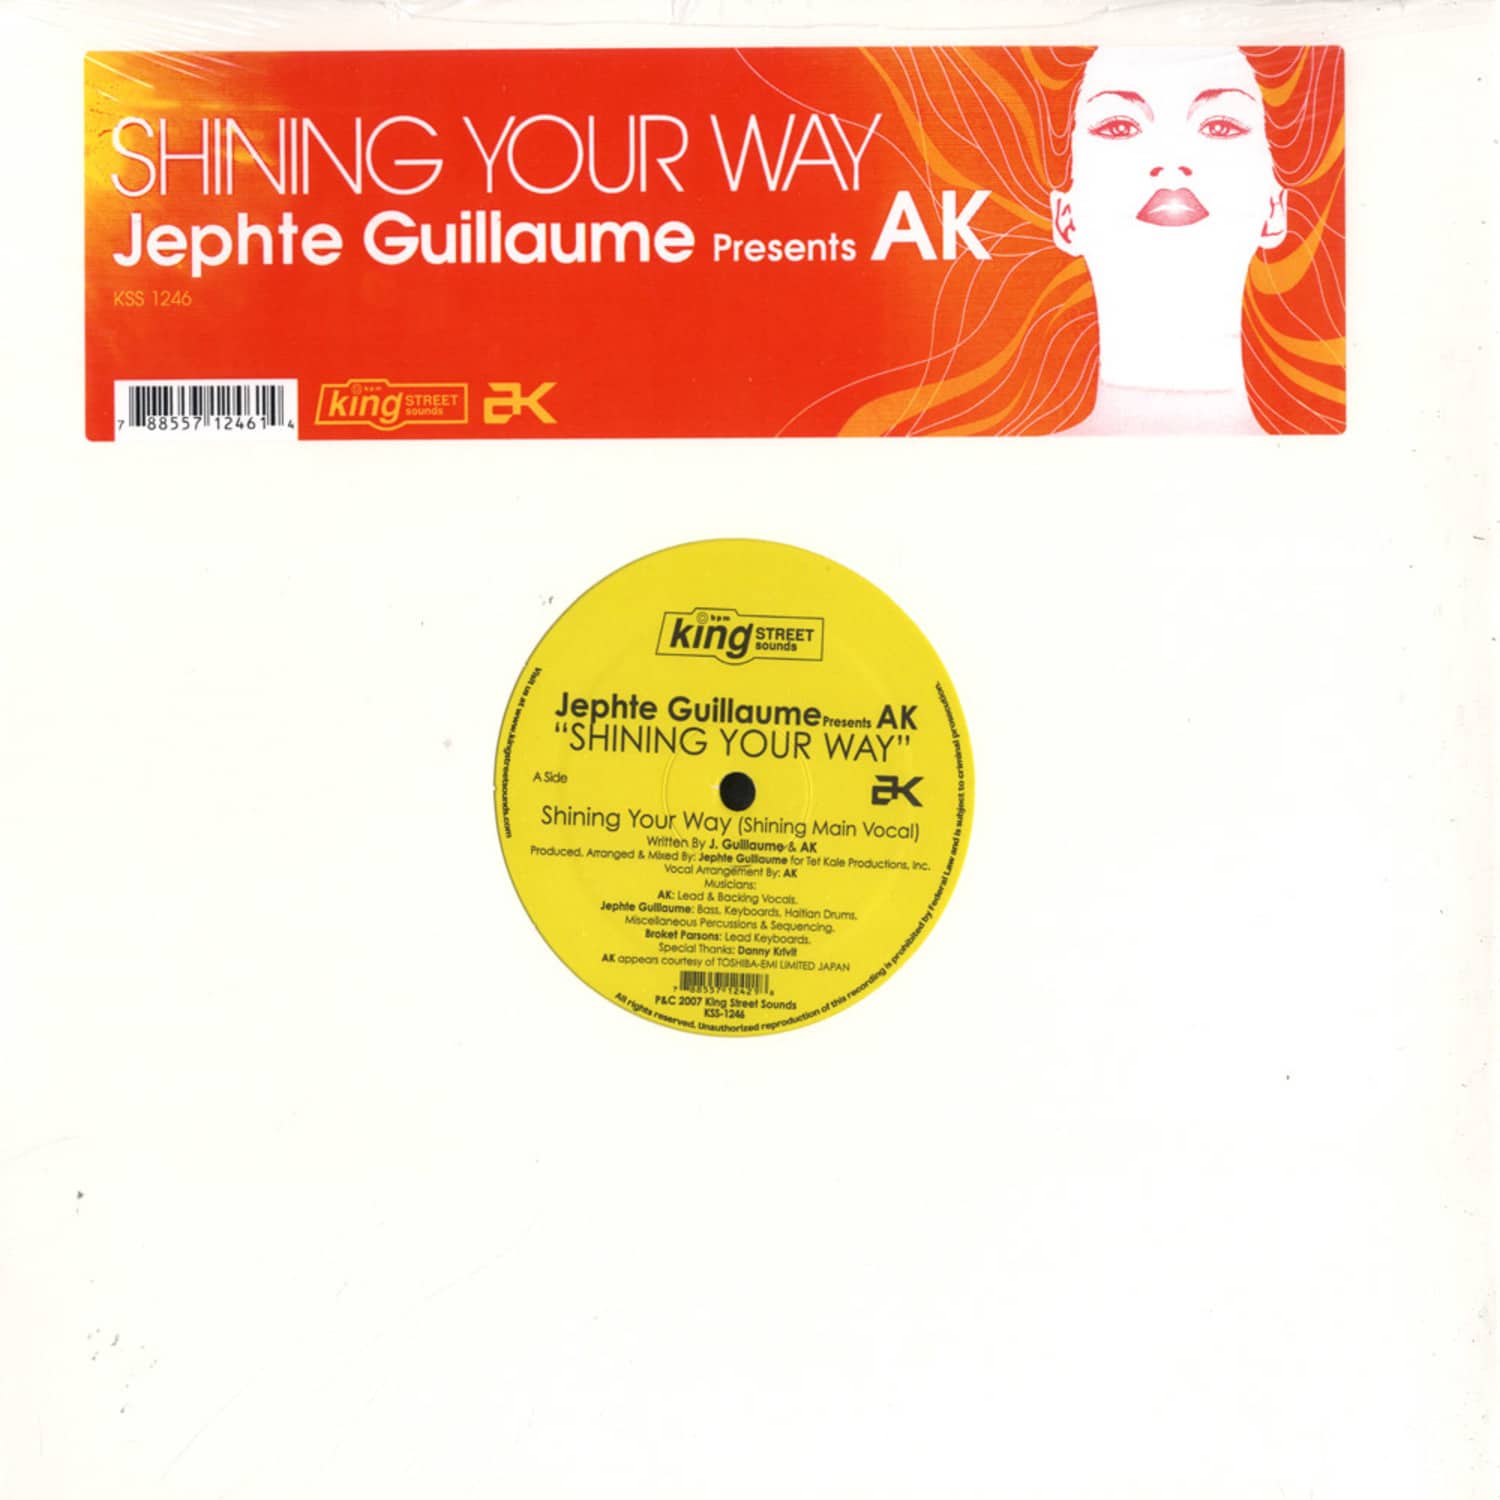 Jephte Guillaume pres. AK - SHINING YOUR WAY